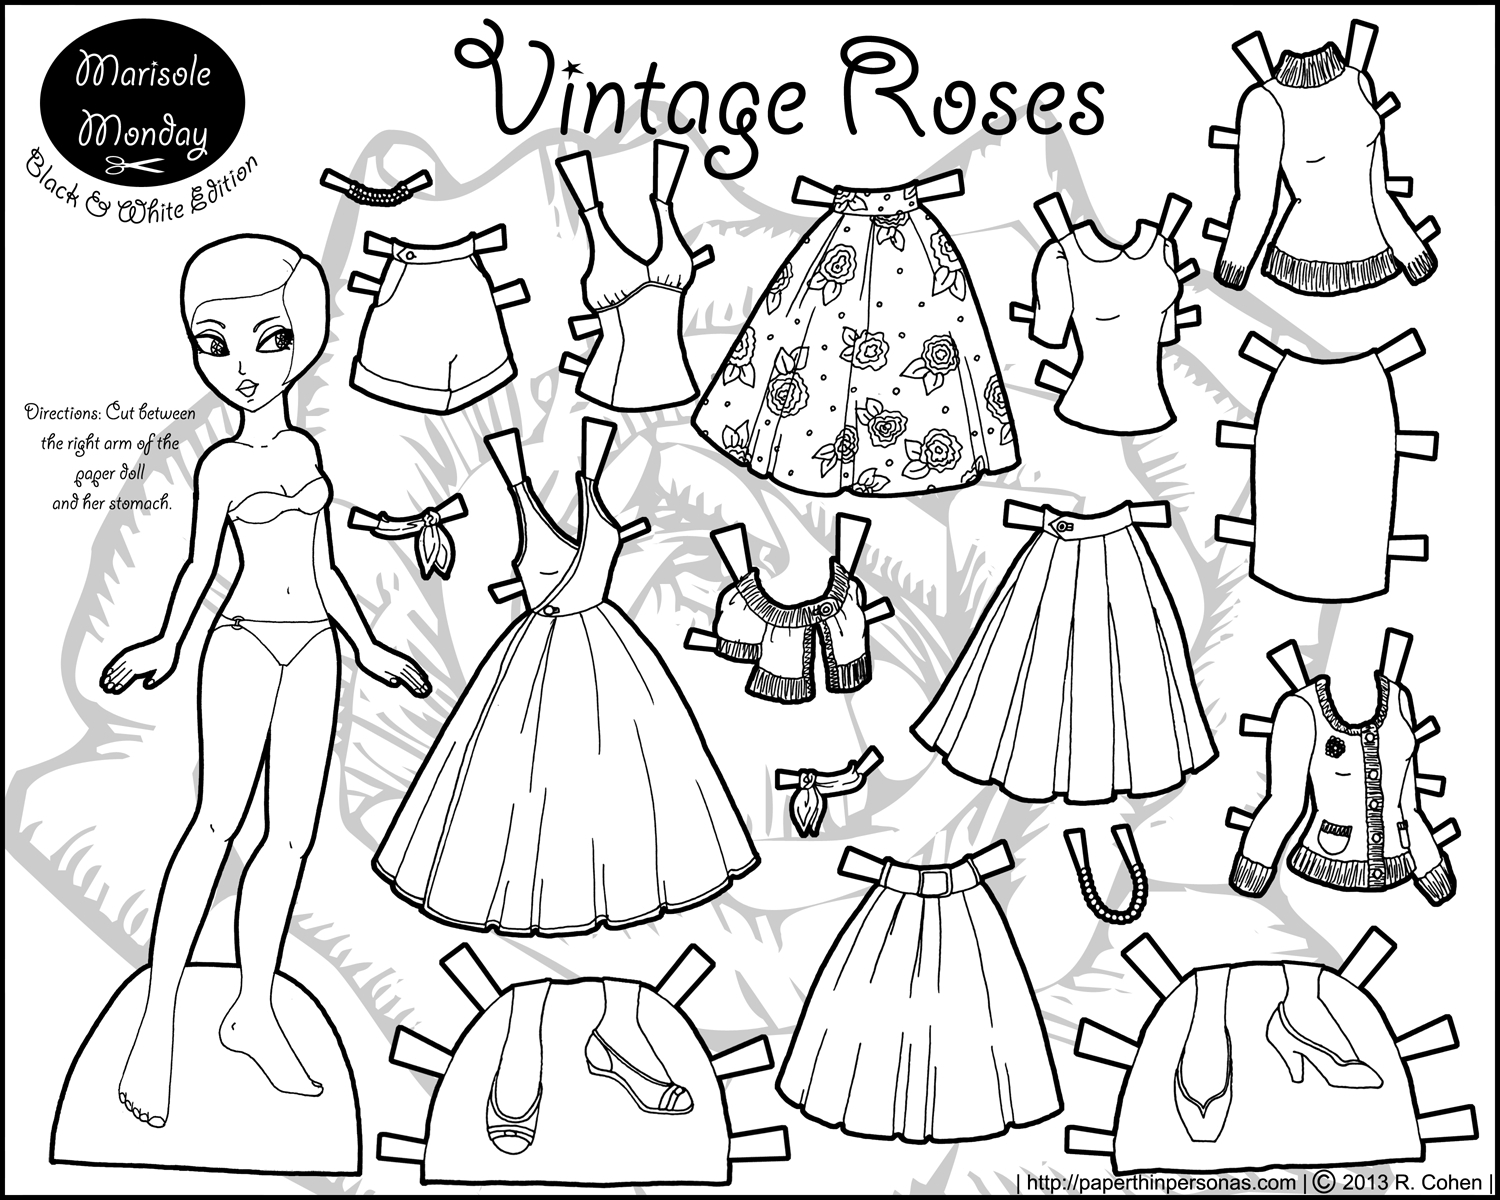 Marisole Monday: Vintage Roses | Coloring! | Paper Dolls, Paper - Printable Paper Dolls To Color Free